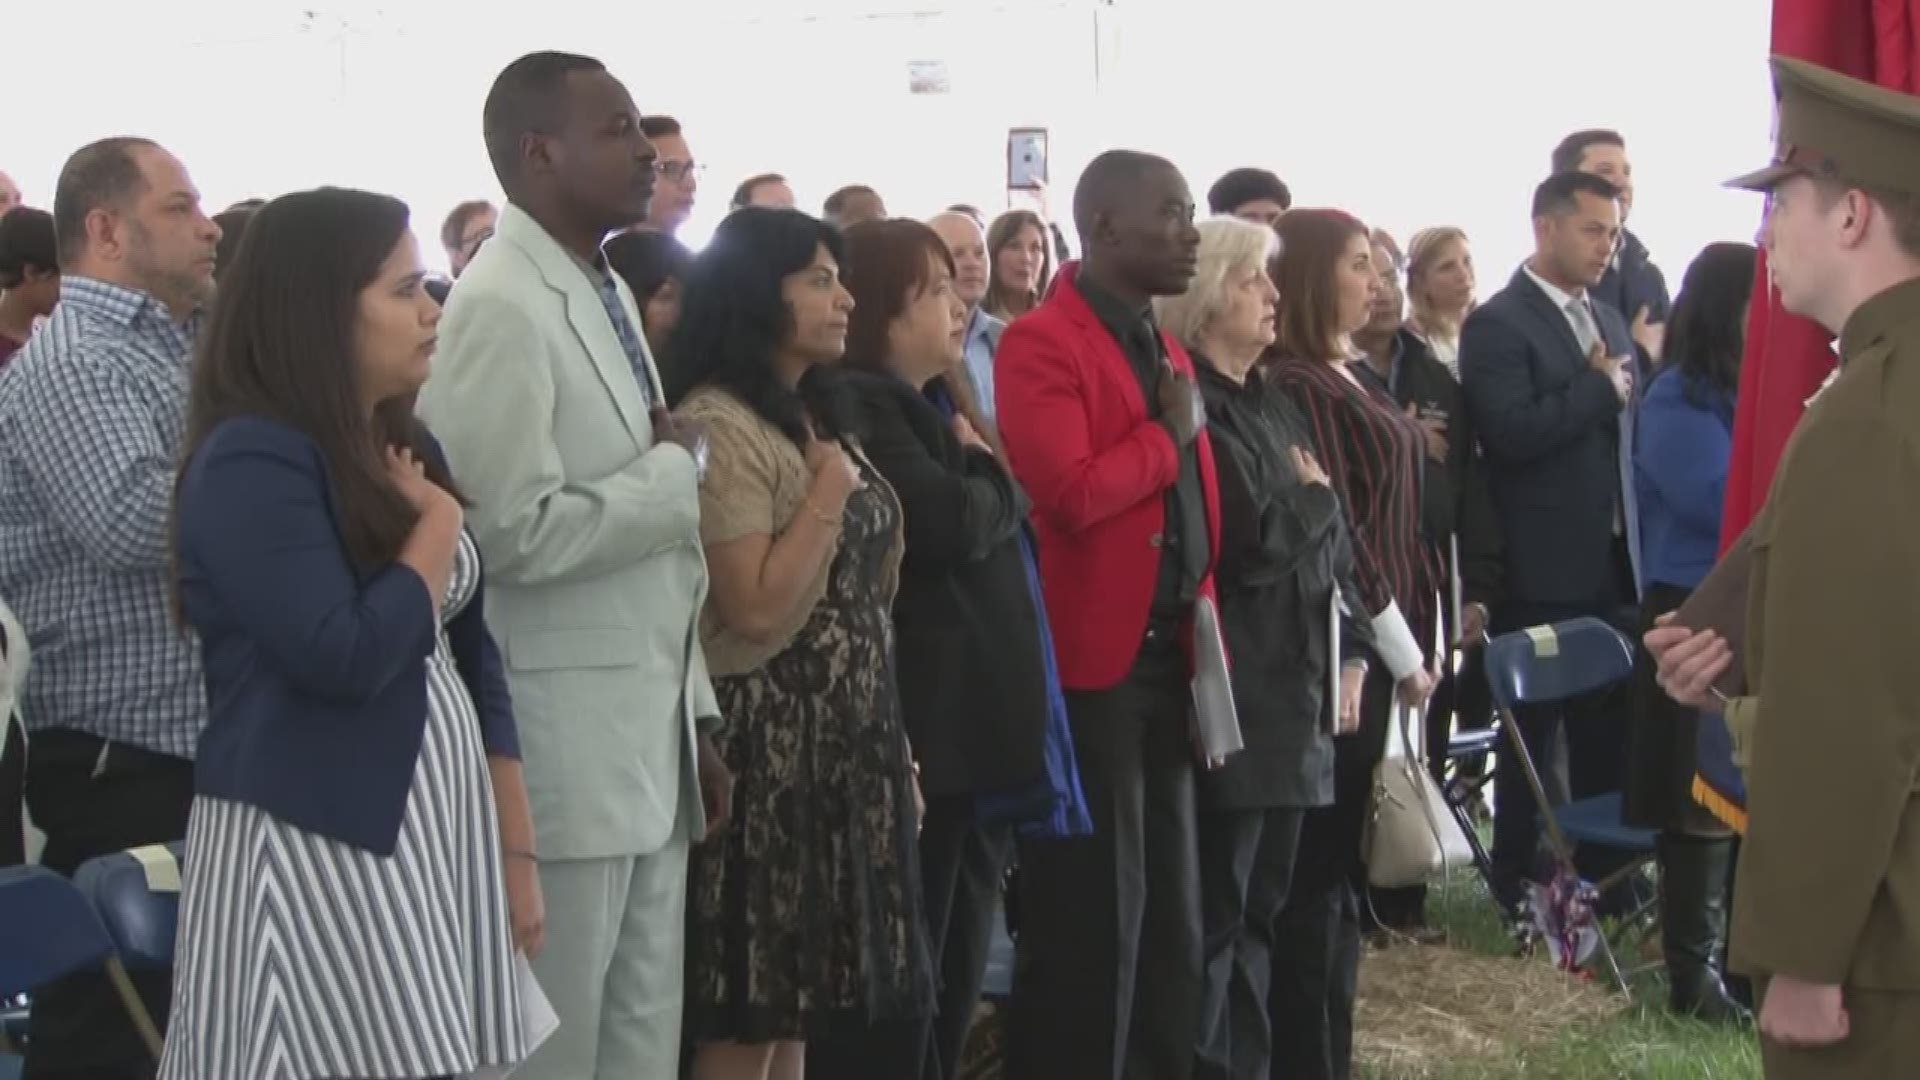 April 26, 2018: 68 people from more than 30 countries became U.S. citizens at Big South Fork in East Tennessee.